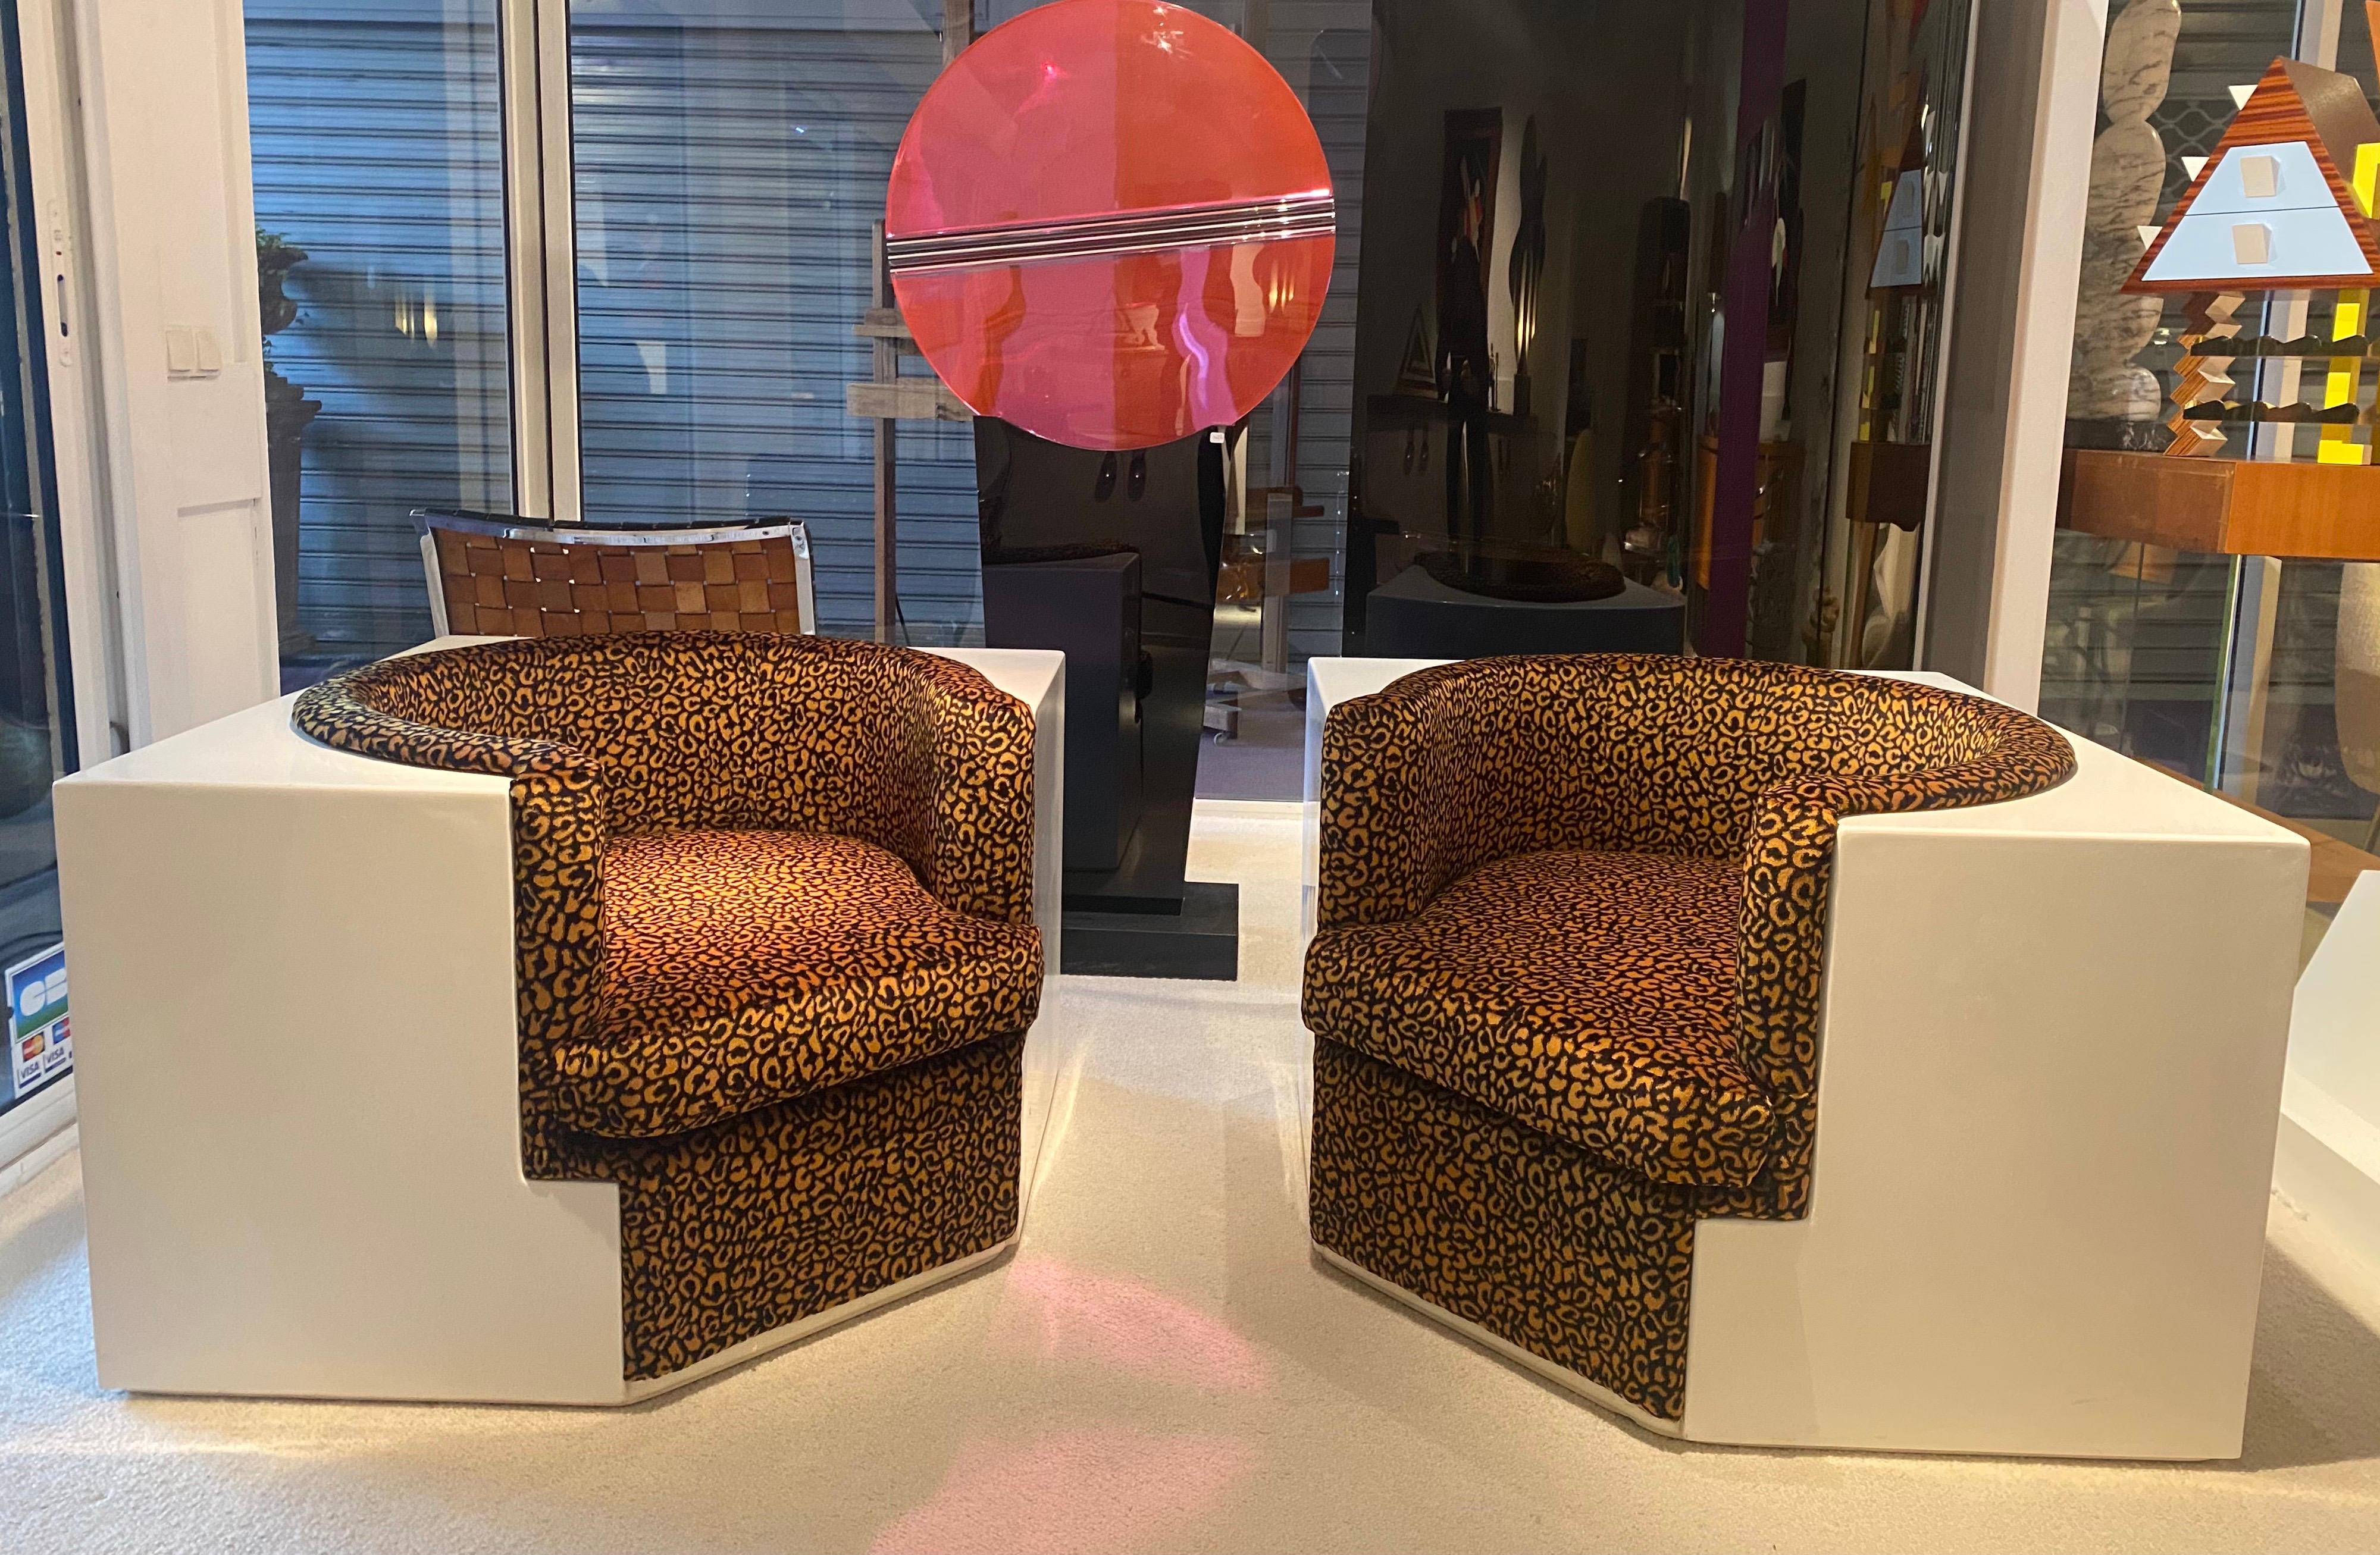 iconic Safari armchairs in fiberglass, Foam rubber and velvet Leopard Skin. Designed in 1968 by Archizoom Associati and produced by Poltronova. 
Italy Circa 1968
Great vintage condition.